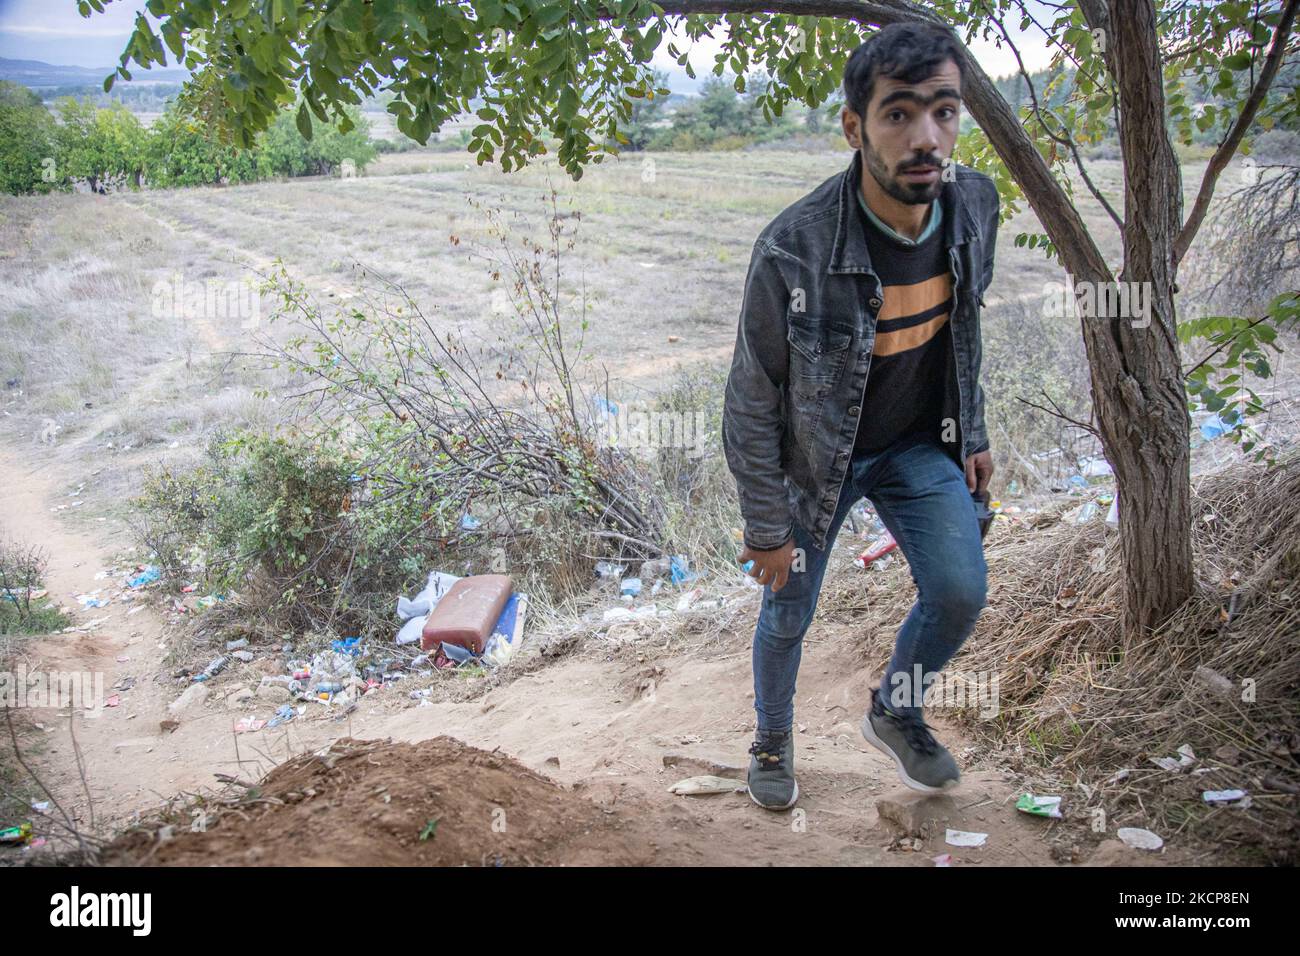 Group of three young asylum seekers walking up to a hill as they return from their attempt to cross the borders. Asylum Seekers are trying to cross the Greek-North Macedonian borders to follow the Balkan Route, famous in 2015-2016 during the Syrian refugee crisis, from Idomeni, Greece to Gevgelija, North Macedonia following the train rails and railway station and then reach central and northern Europe. Refugees and Migrants are seen walking in the fields in the Greek side, before the fence that separates the two countries, trying to reach and pass the borders. The small groups are mostly male  Stock Photo